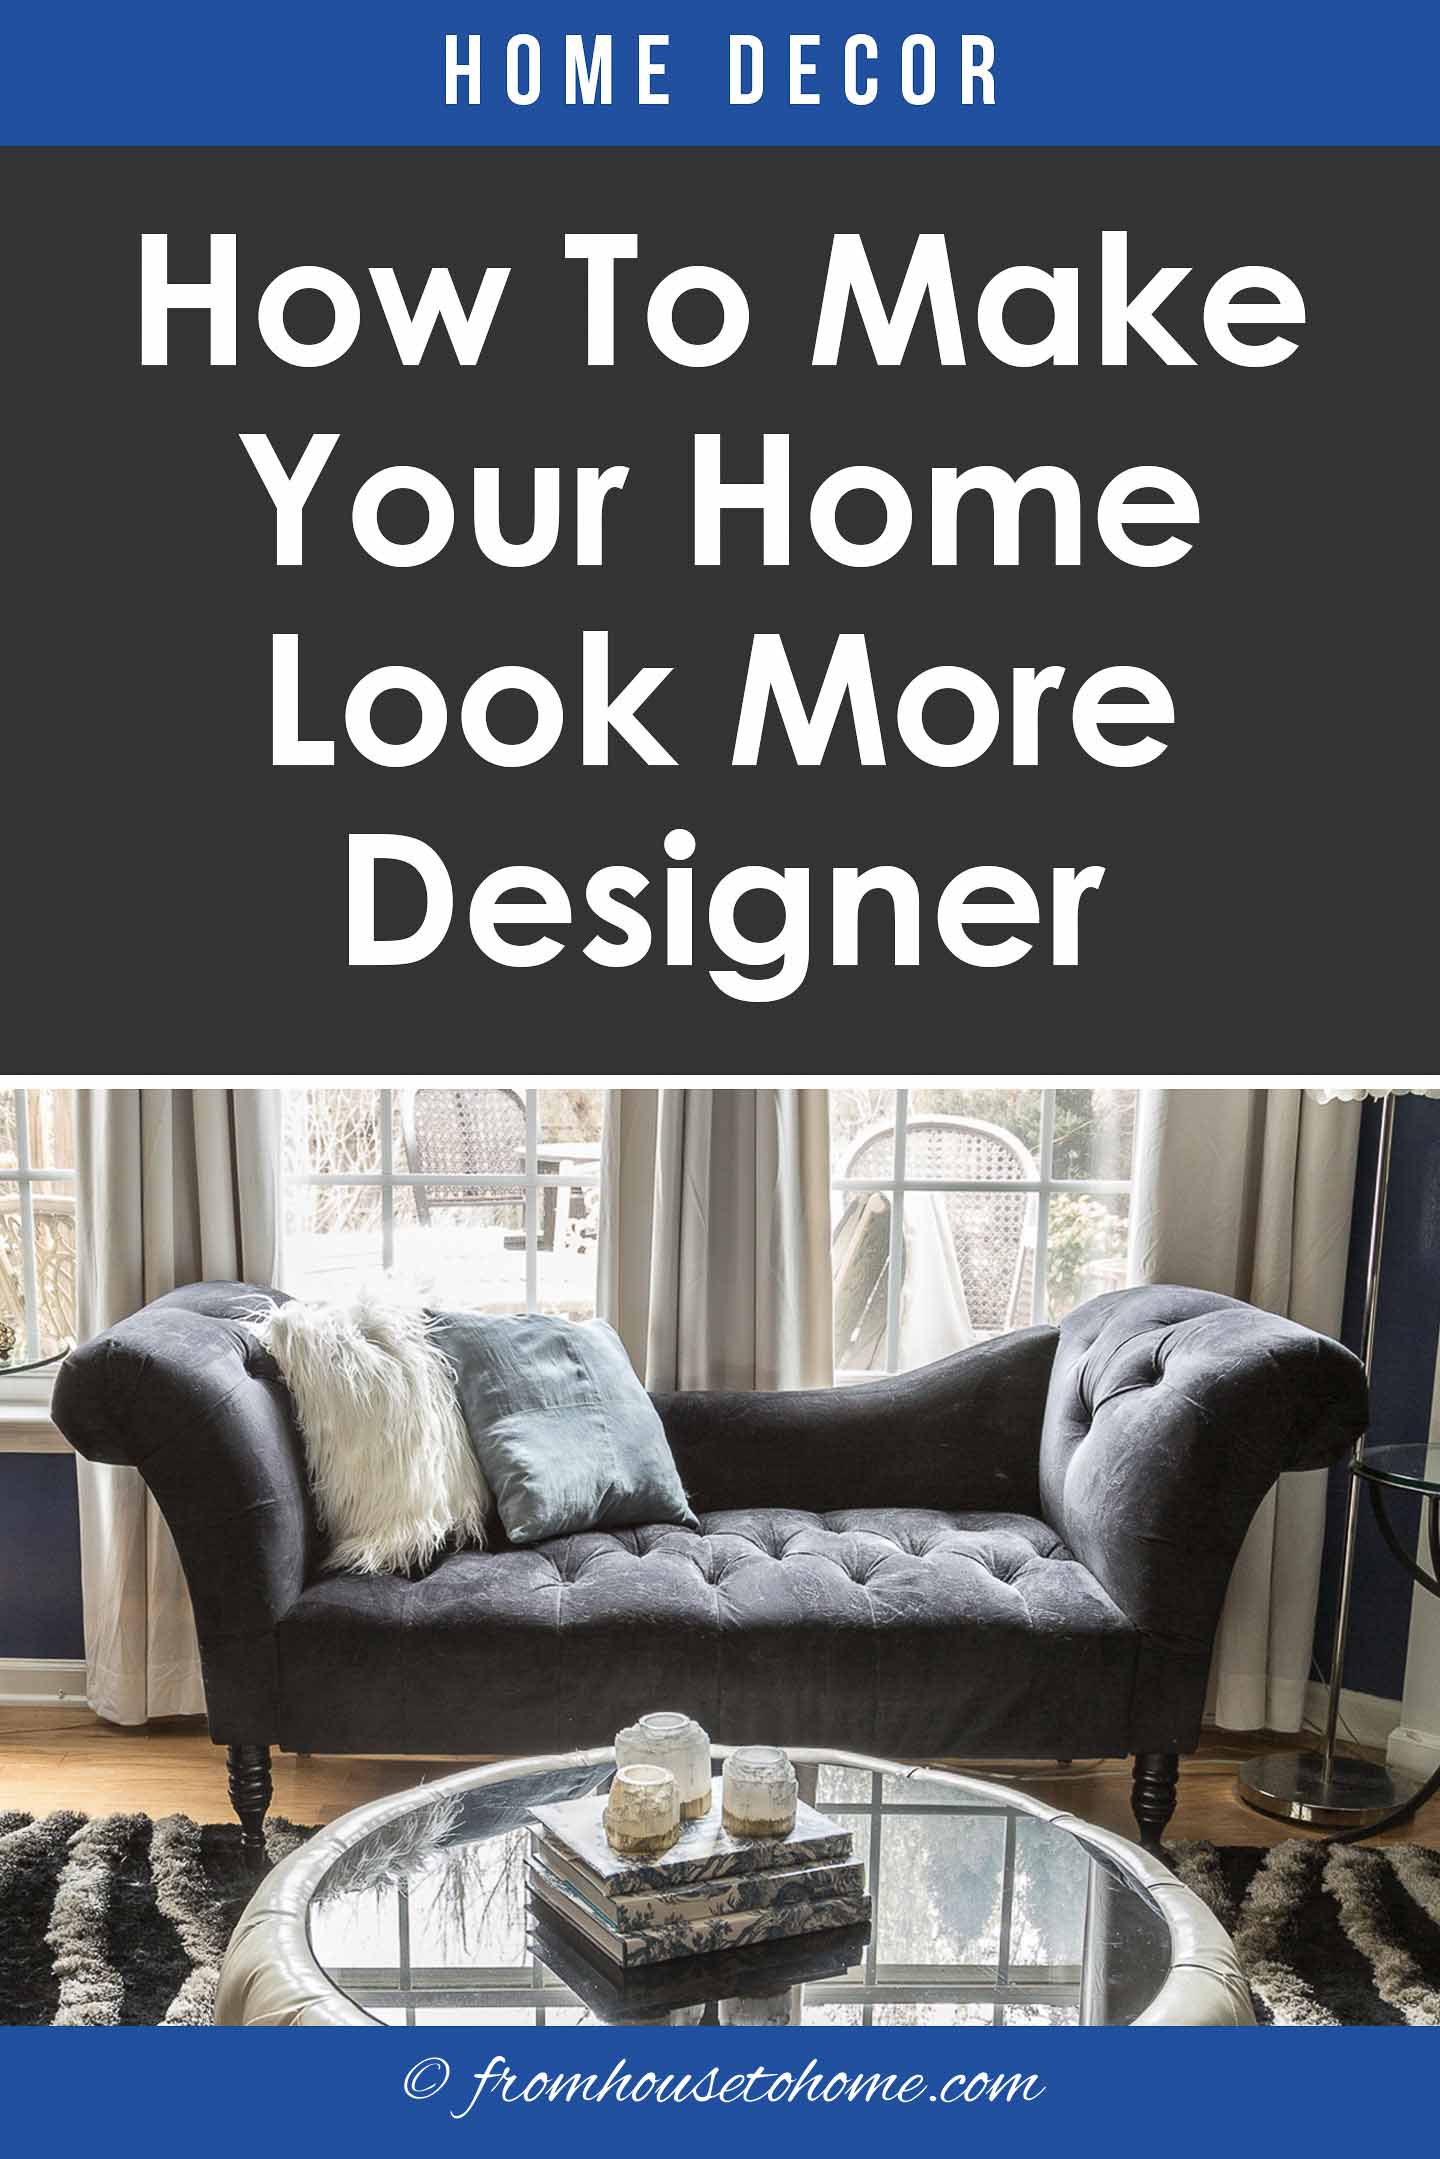 How to make your home look more designer